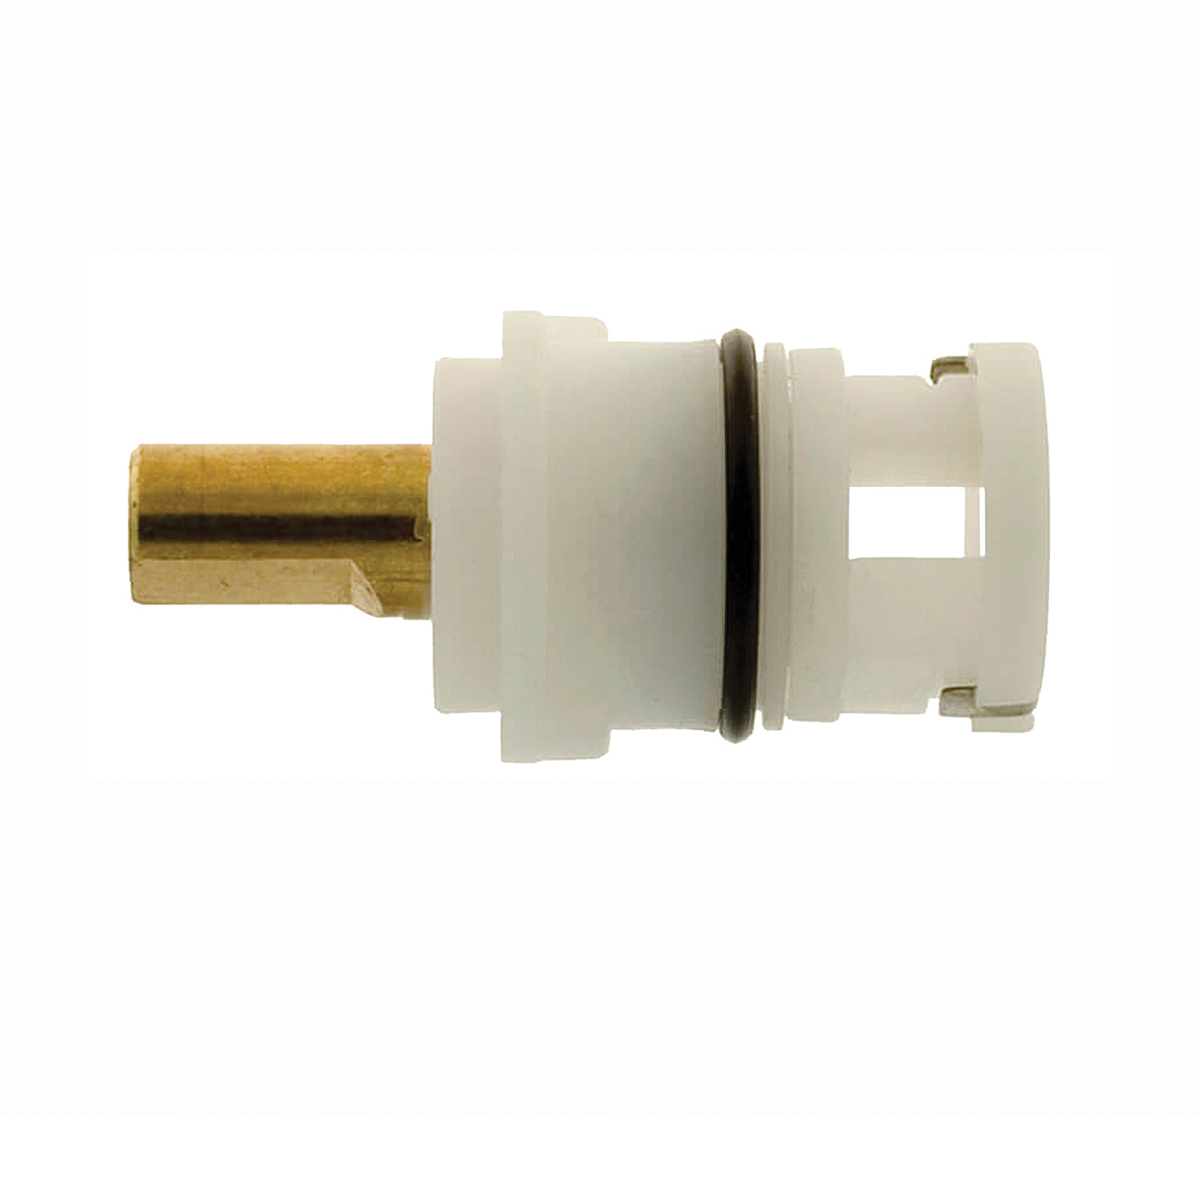 09325B Faucet Stem, Plastic, 1-57/64 in L, For: Delta Two Handle Faucets